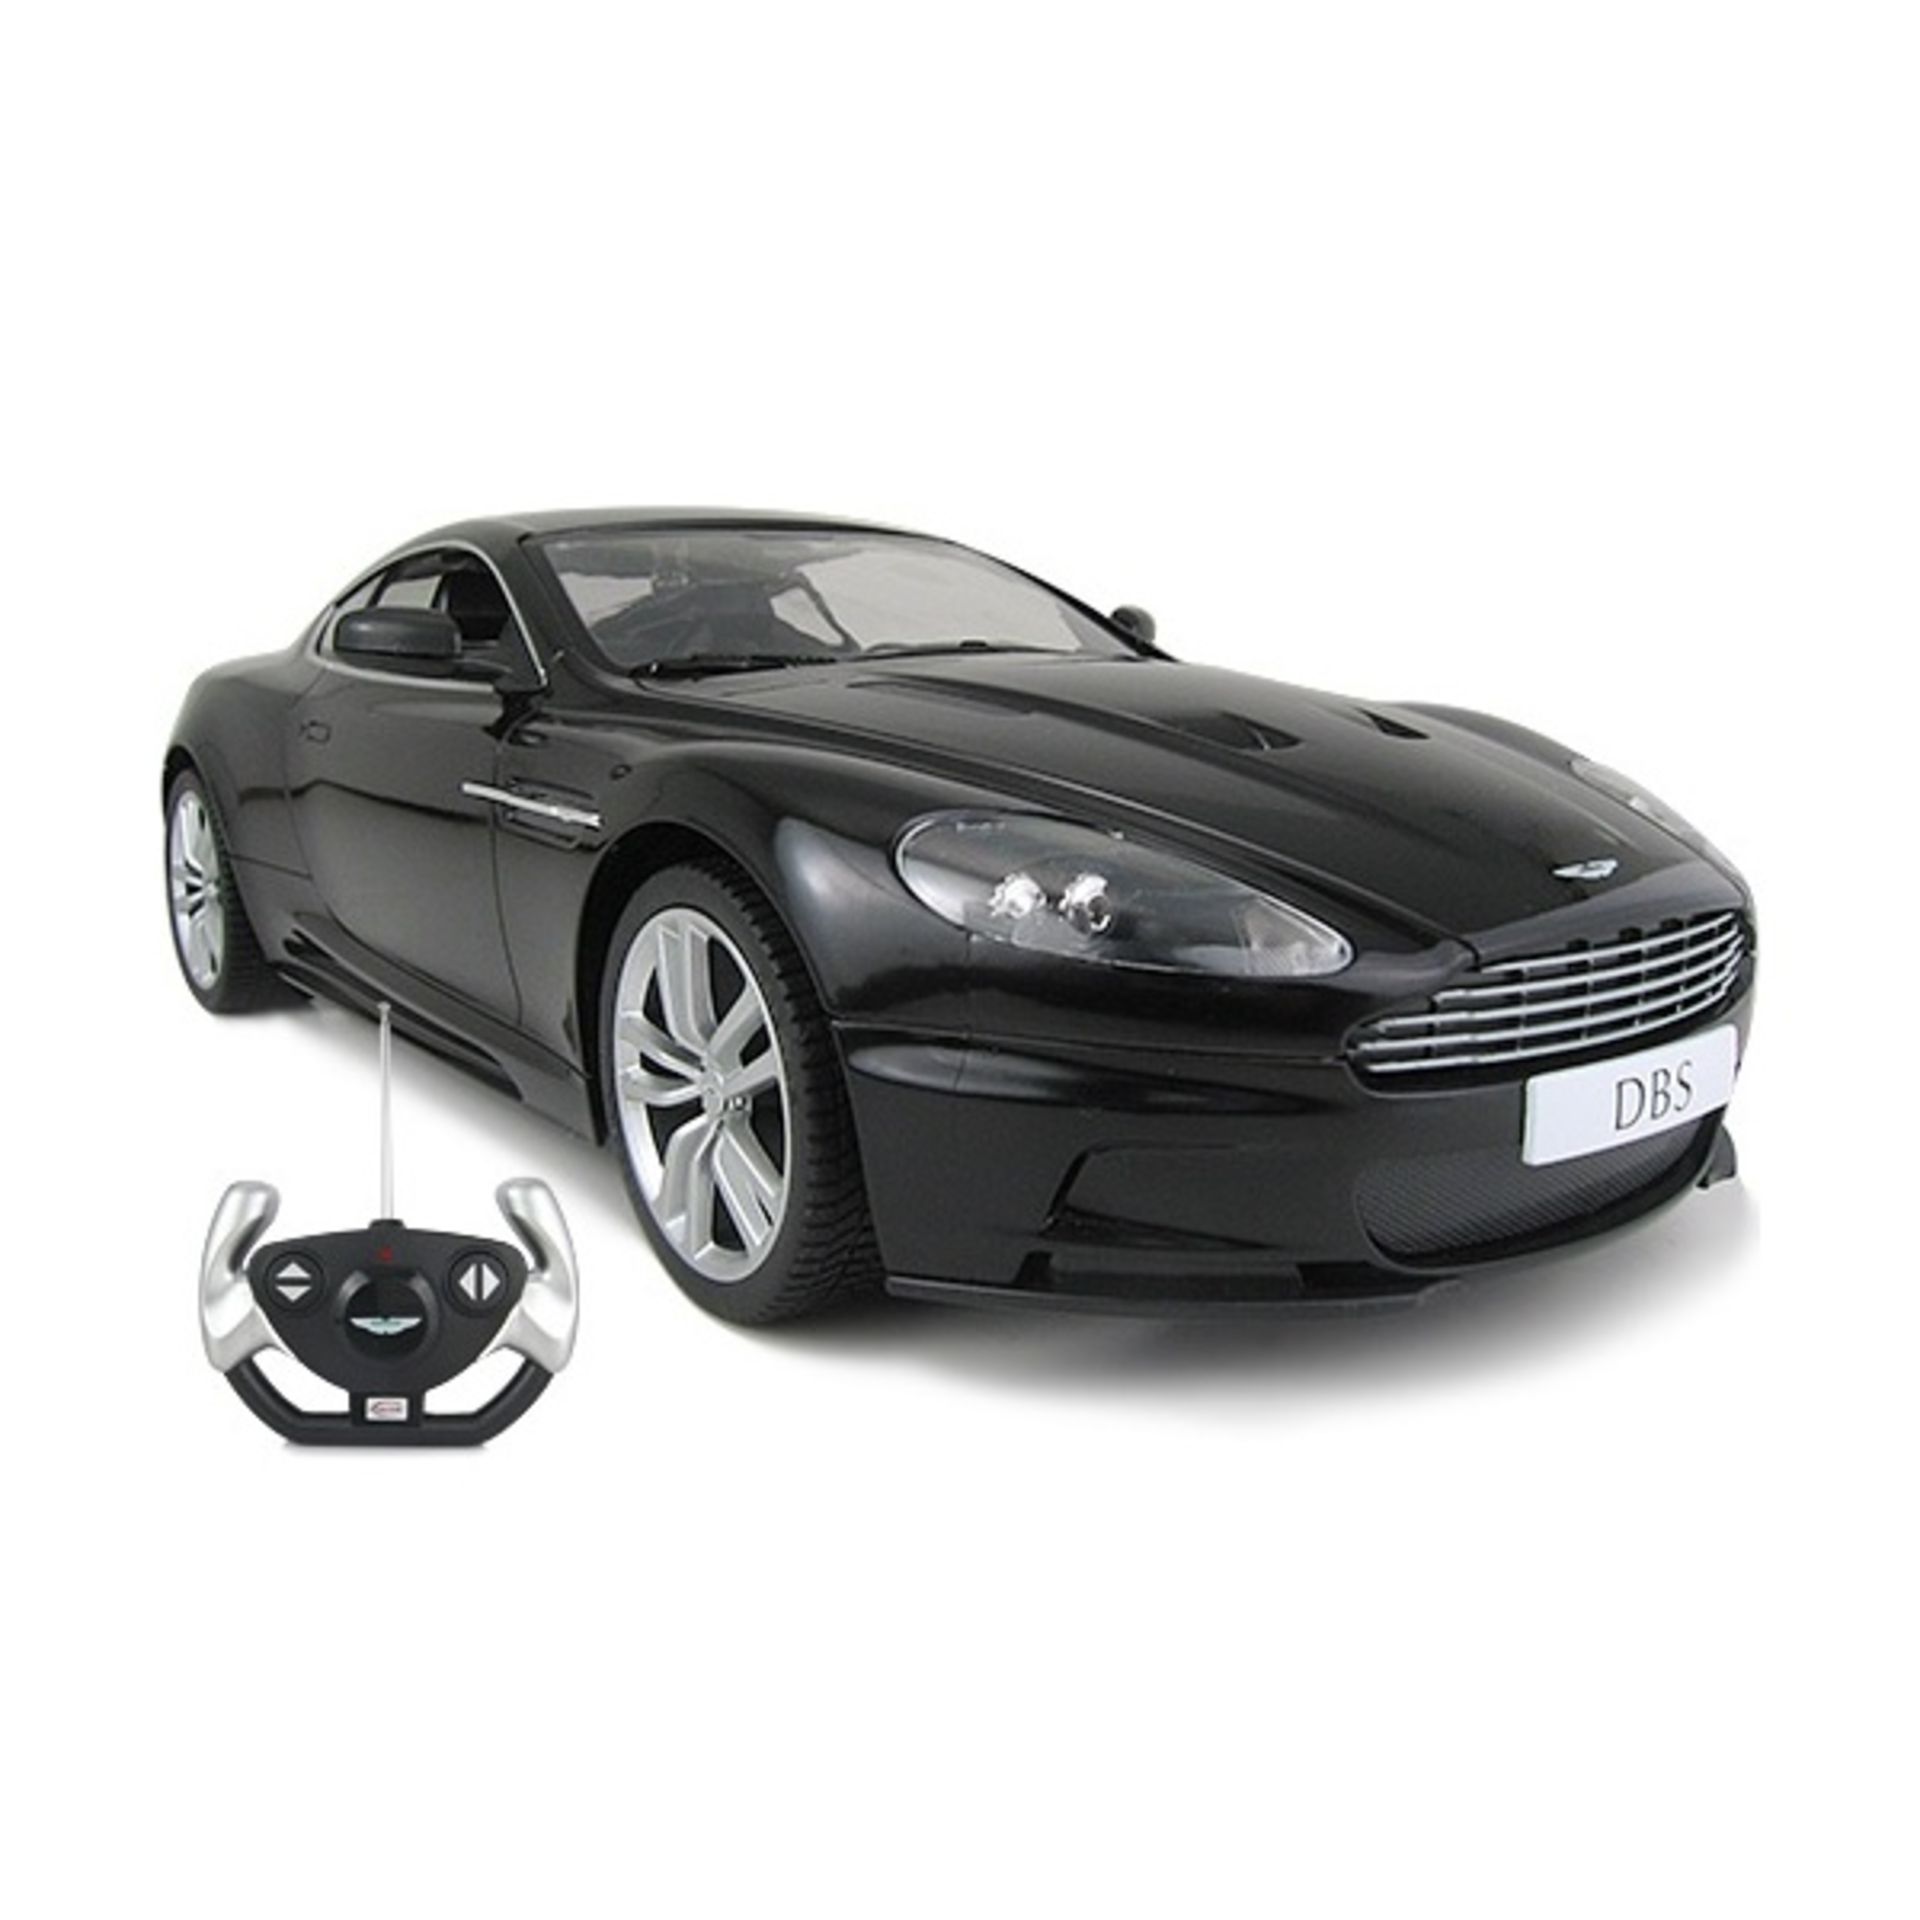 V Brand New Aston Martin DBS Coupe 1/10 Scale (Very Big) - Radio Control - Assorted Black & Silver